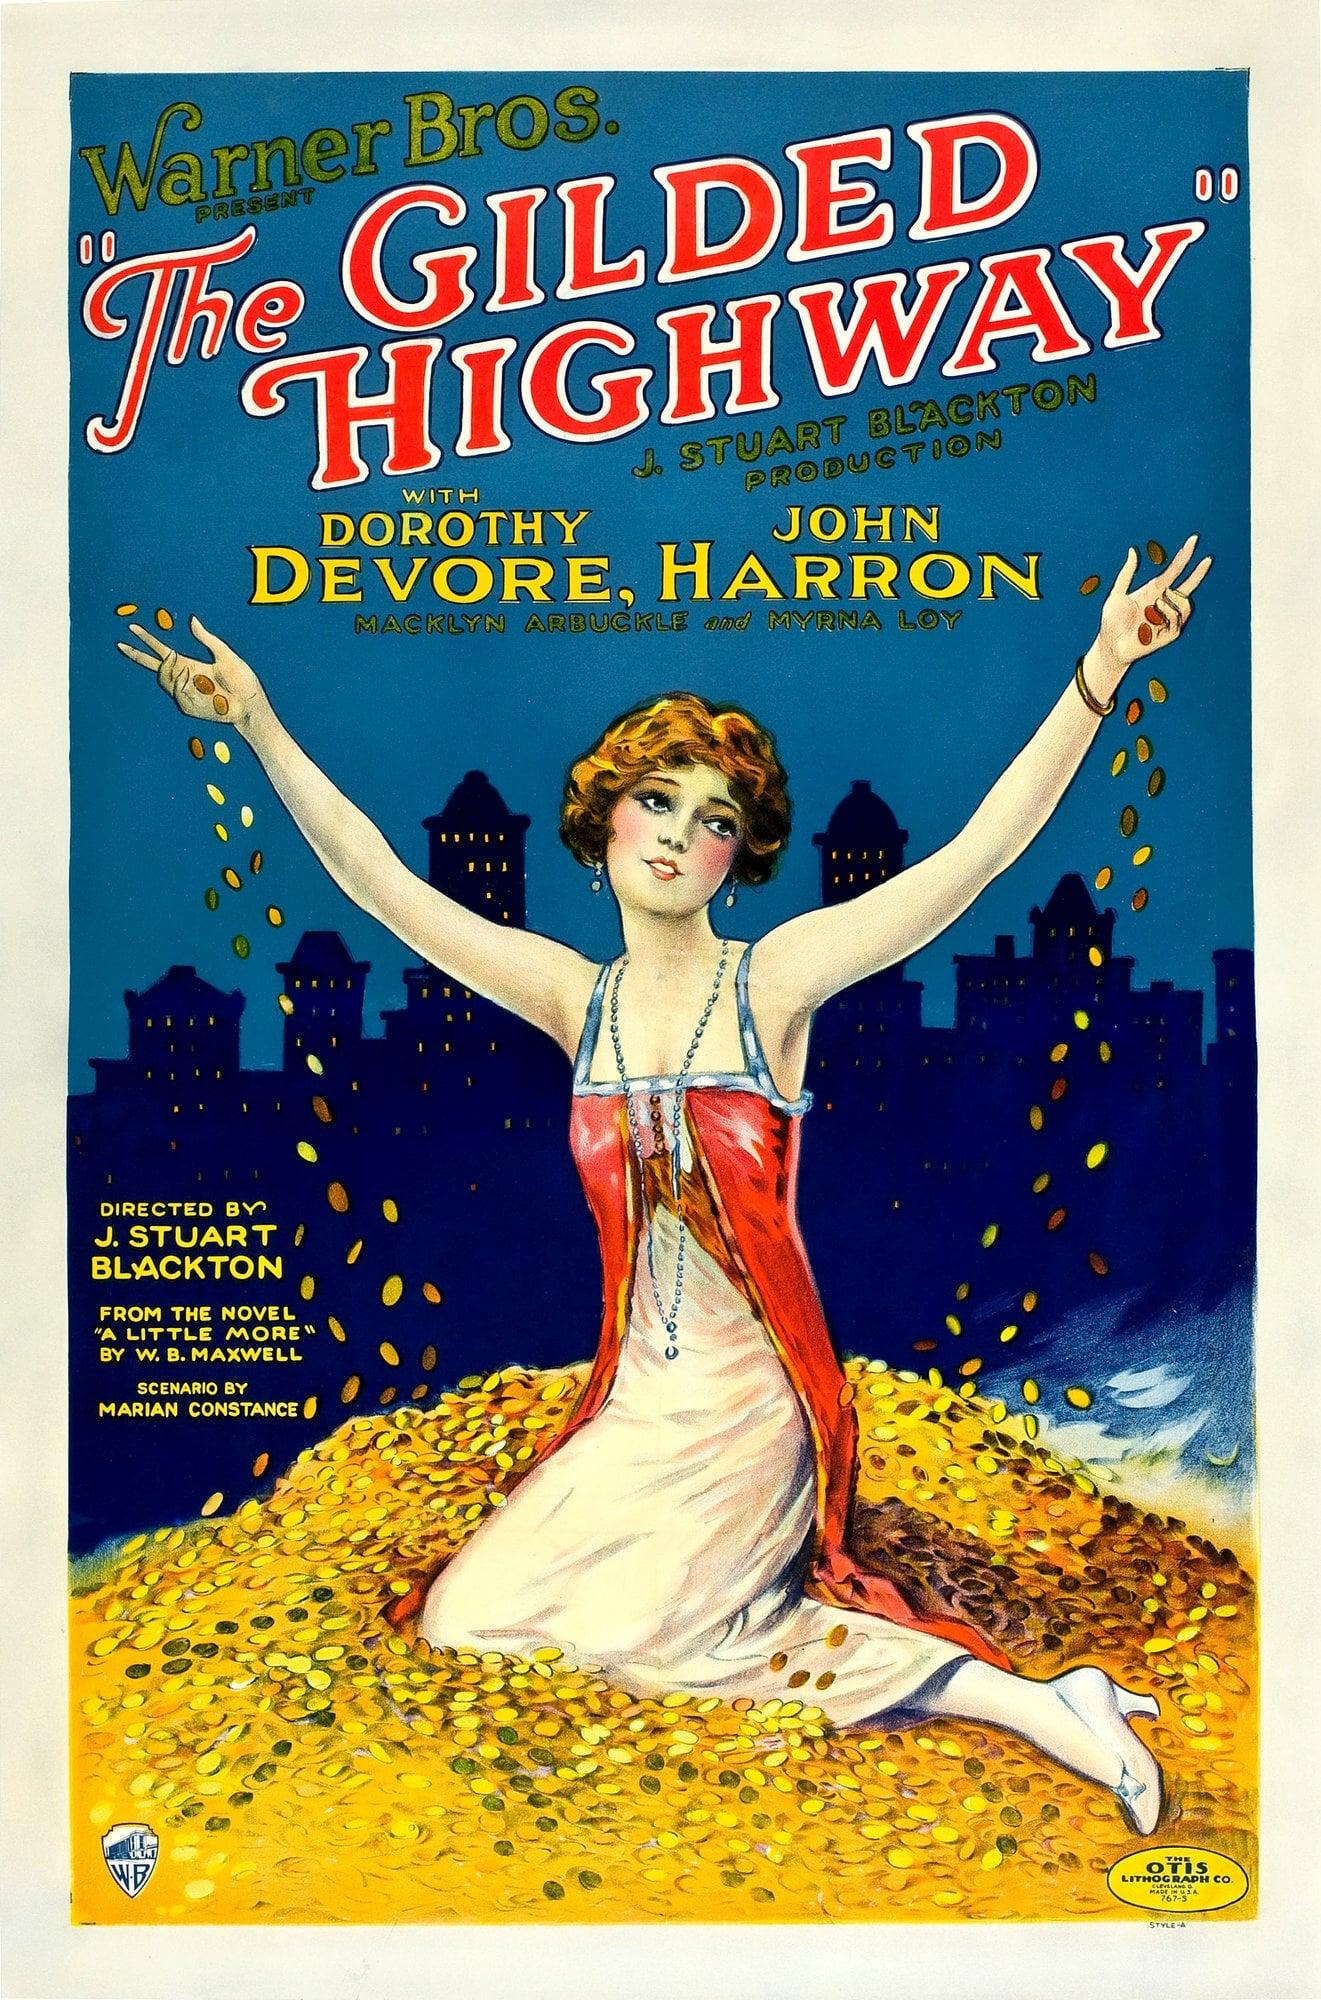 The Gilded Highway poster